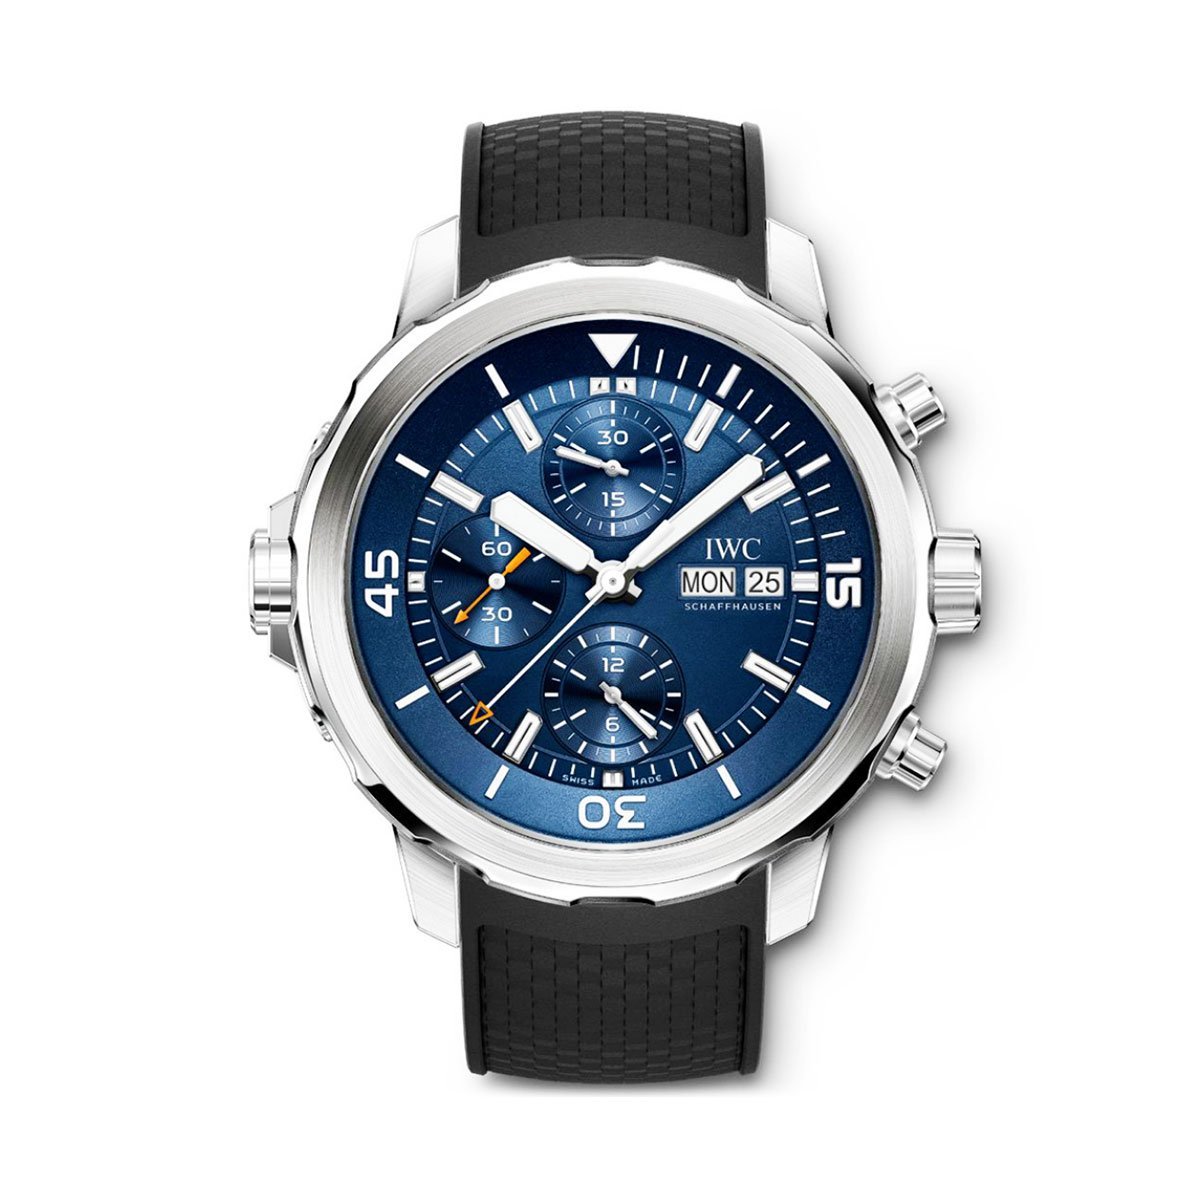 Aquatimer Edition “Expedition Jacques-Yves Cousteau” 44mm Watch